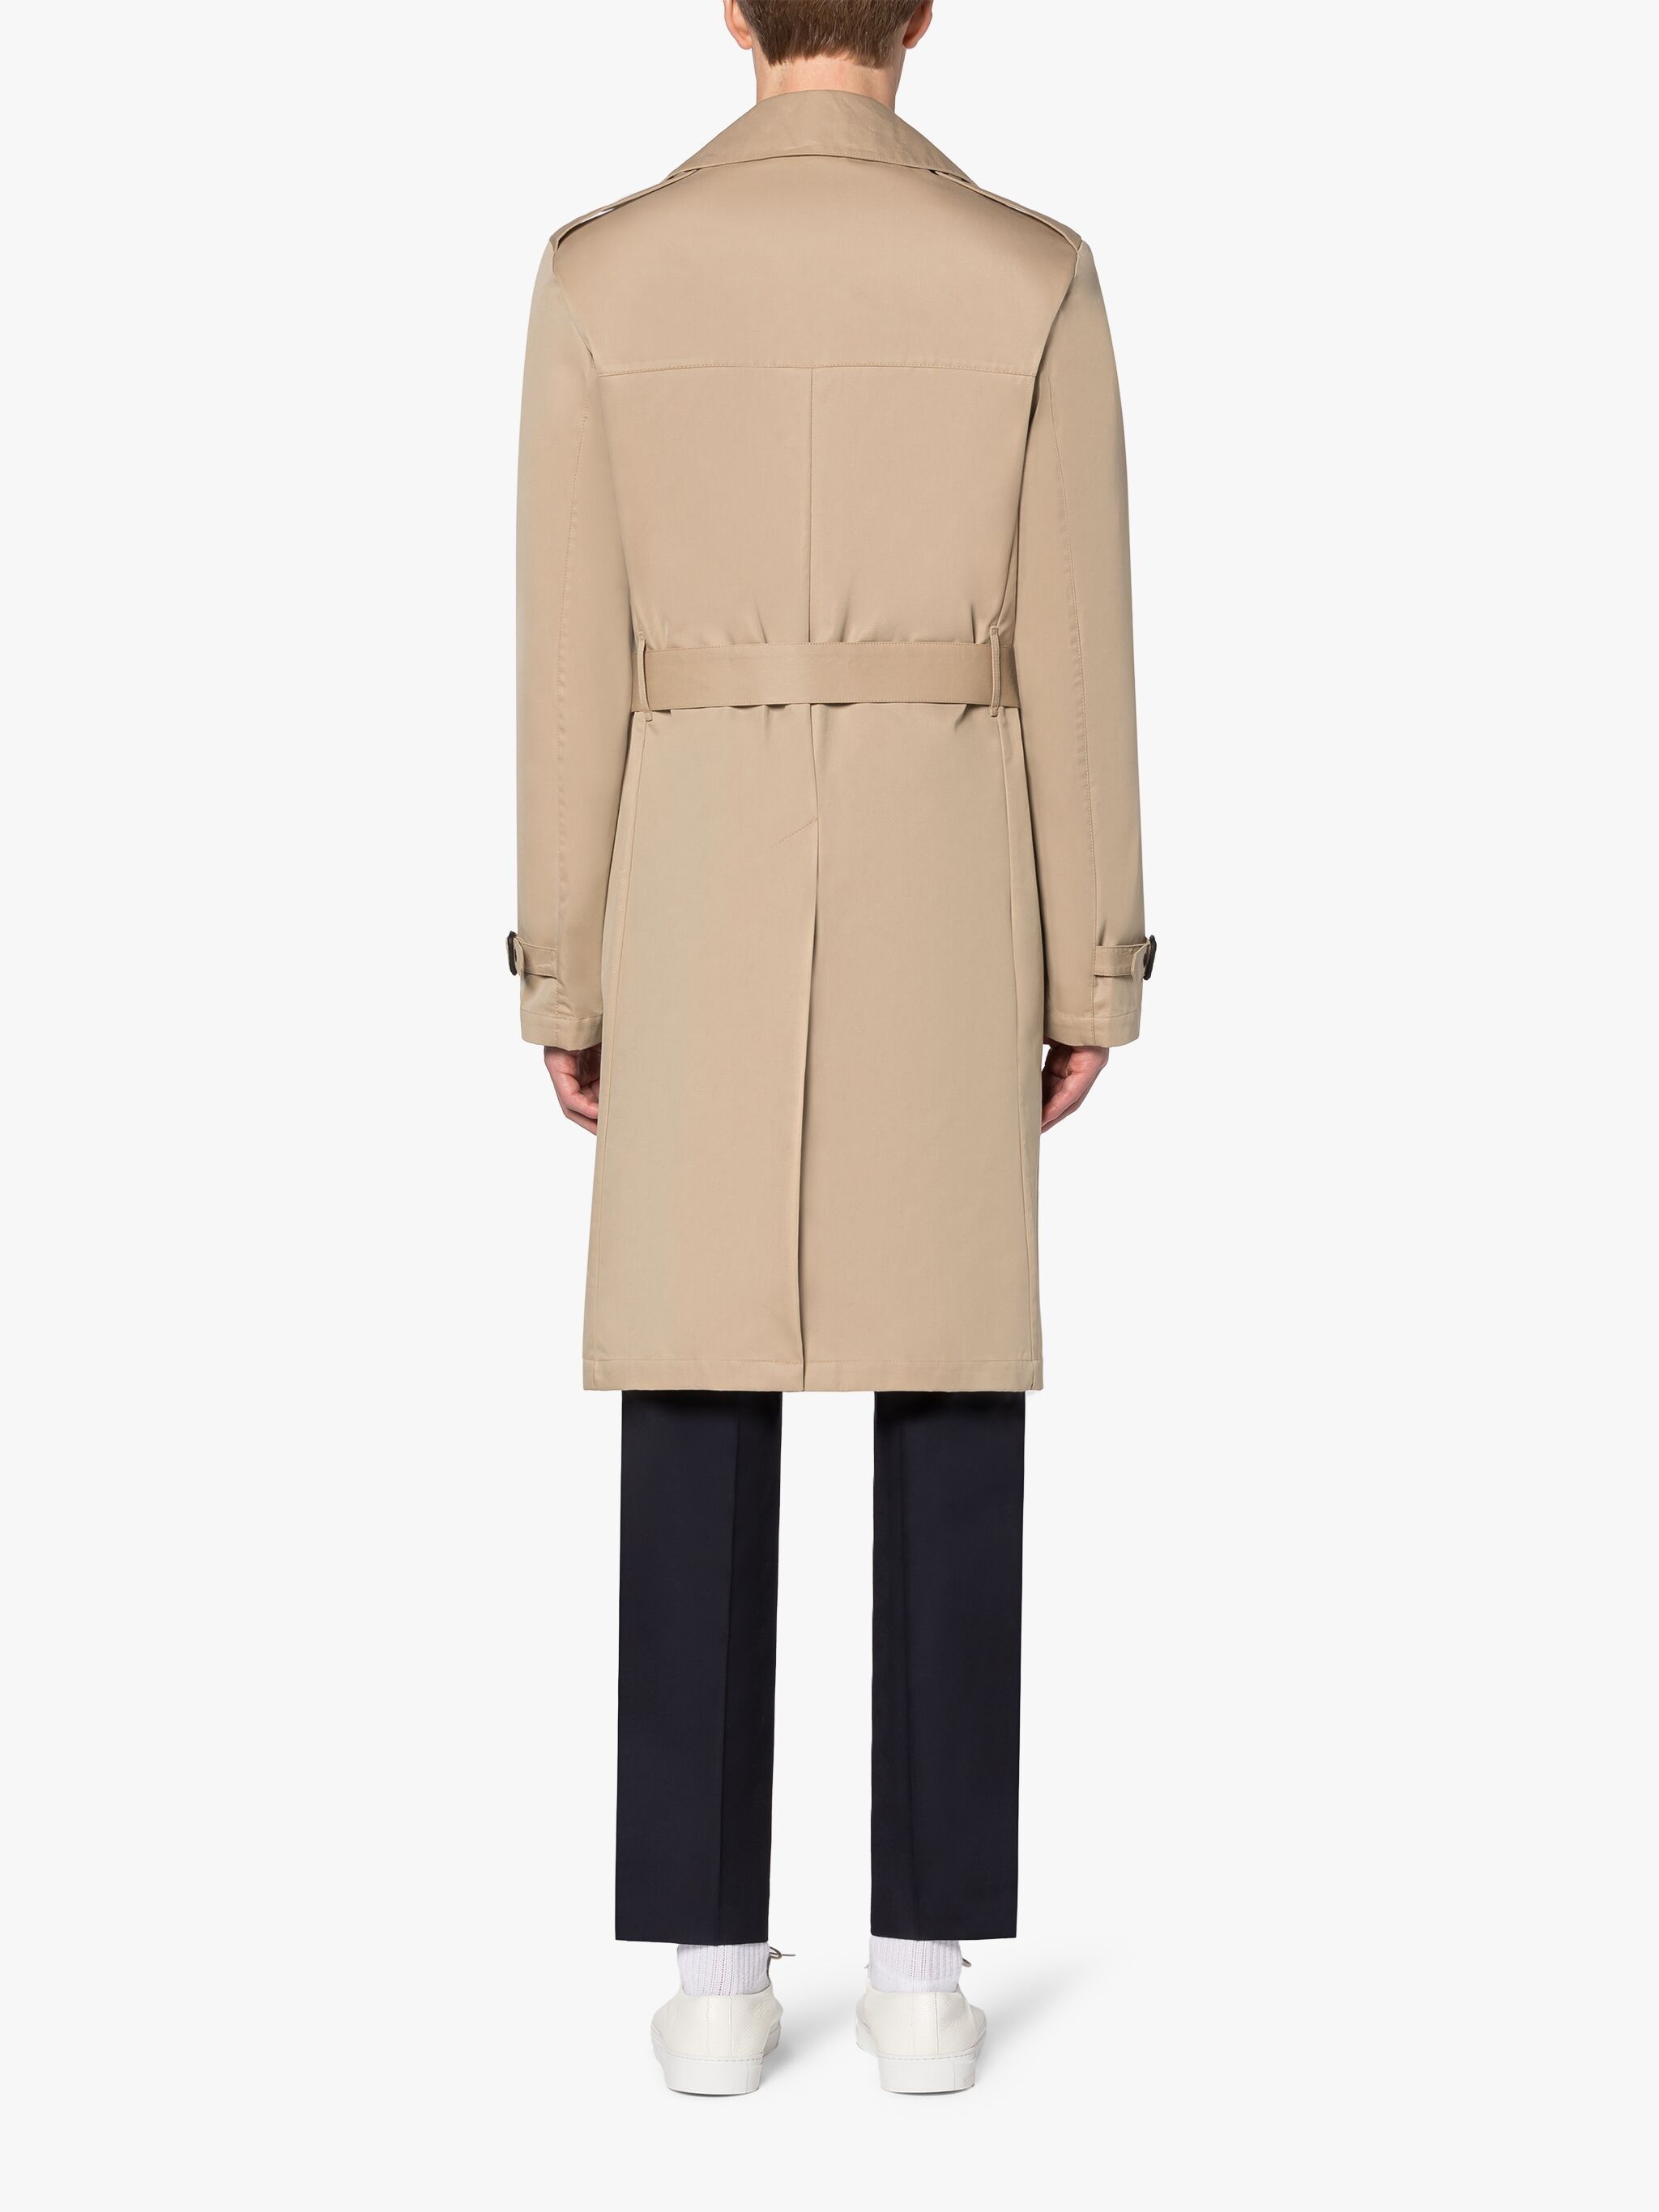 ST ANDREWS SAND COTTON TRENCH COAT - 3